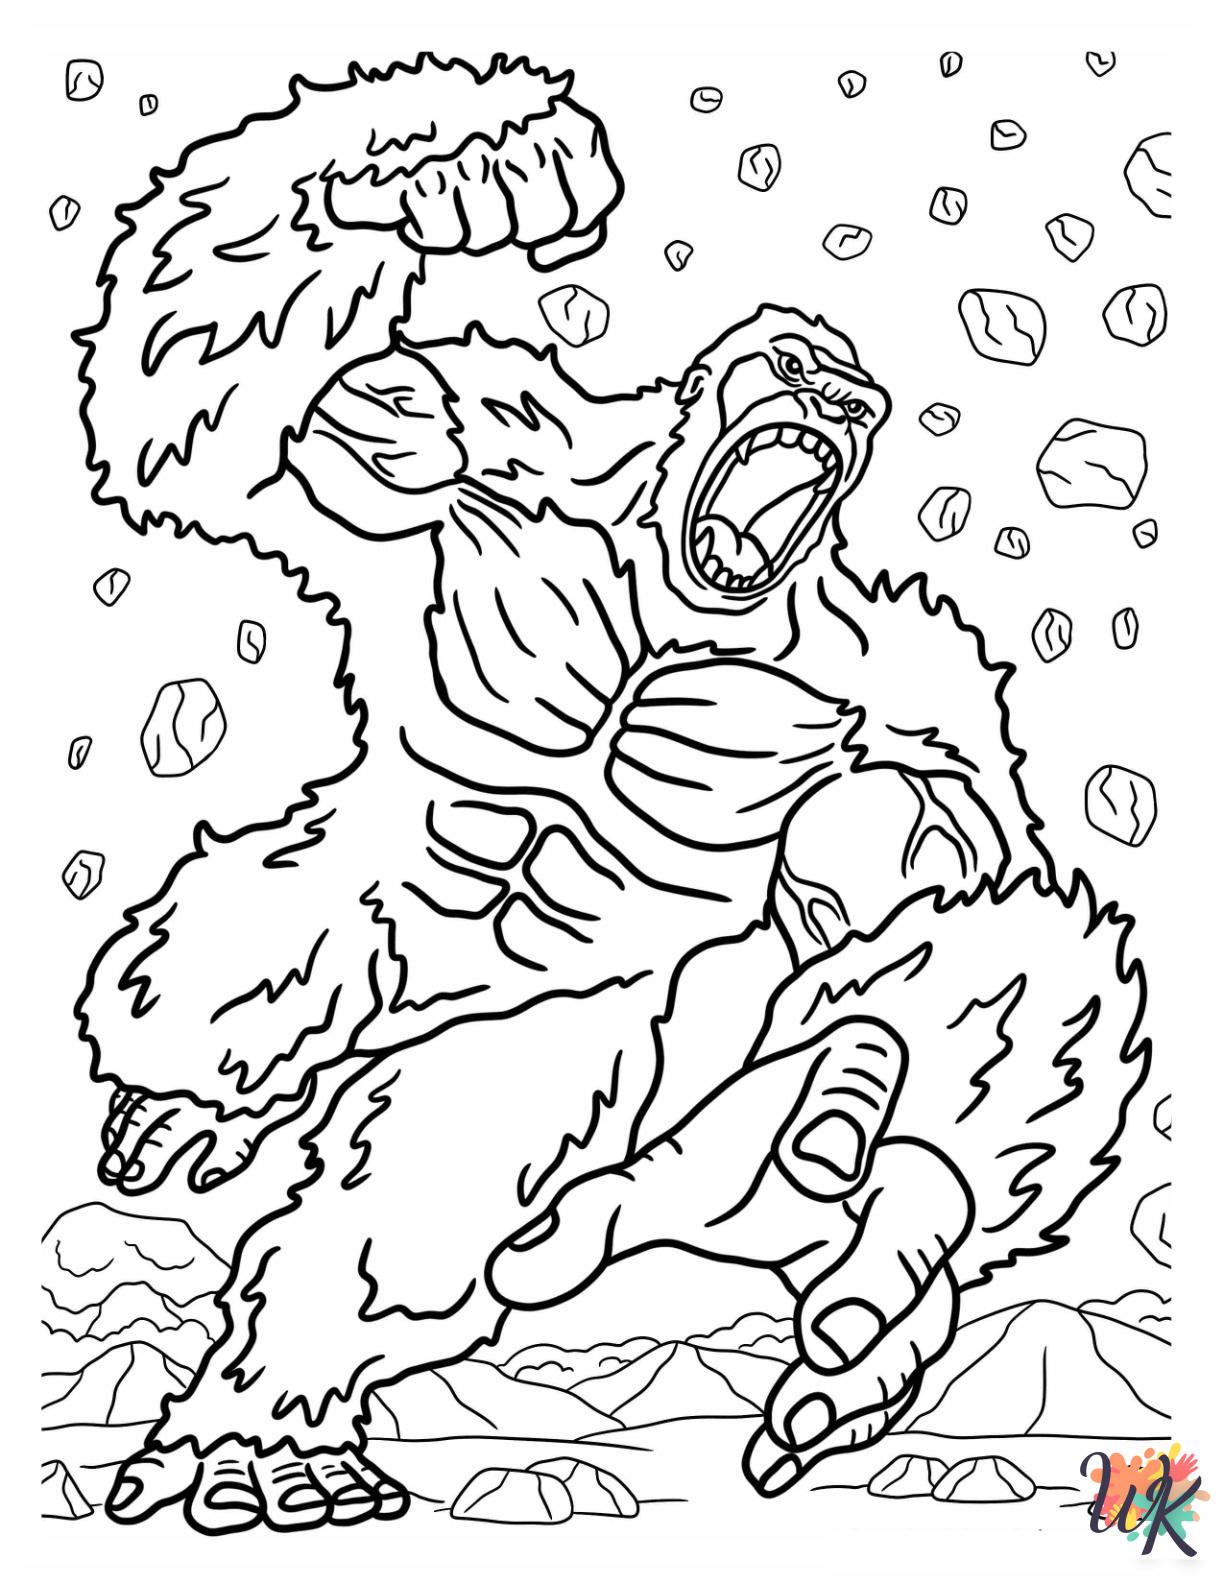 King Kong coloring pages easy